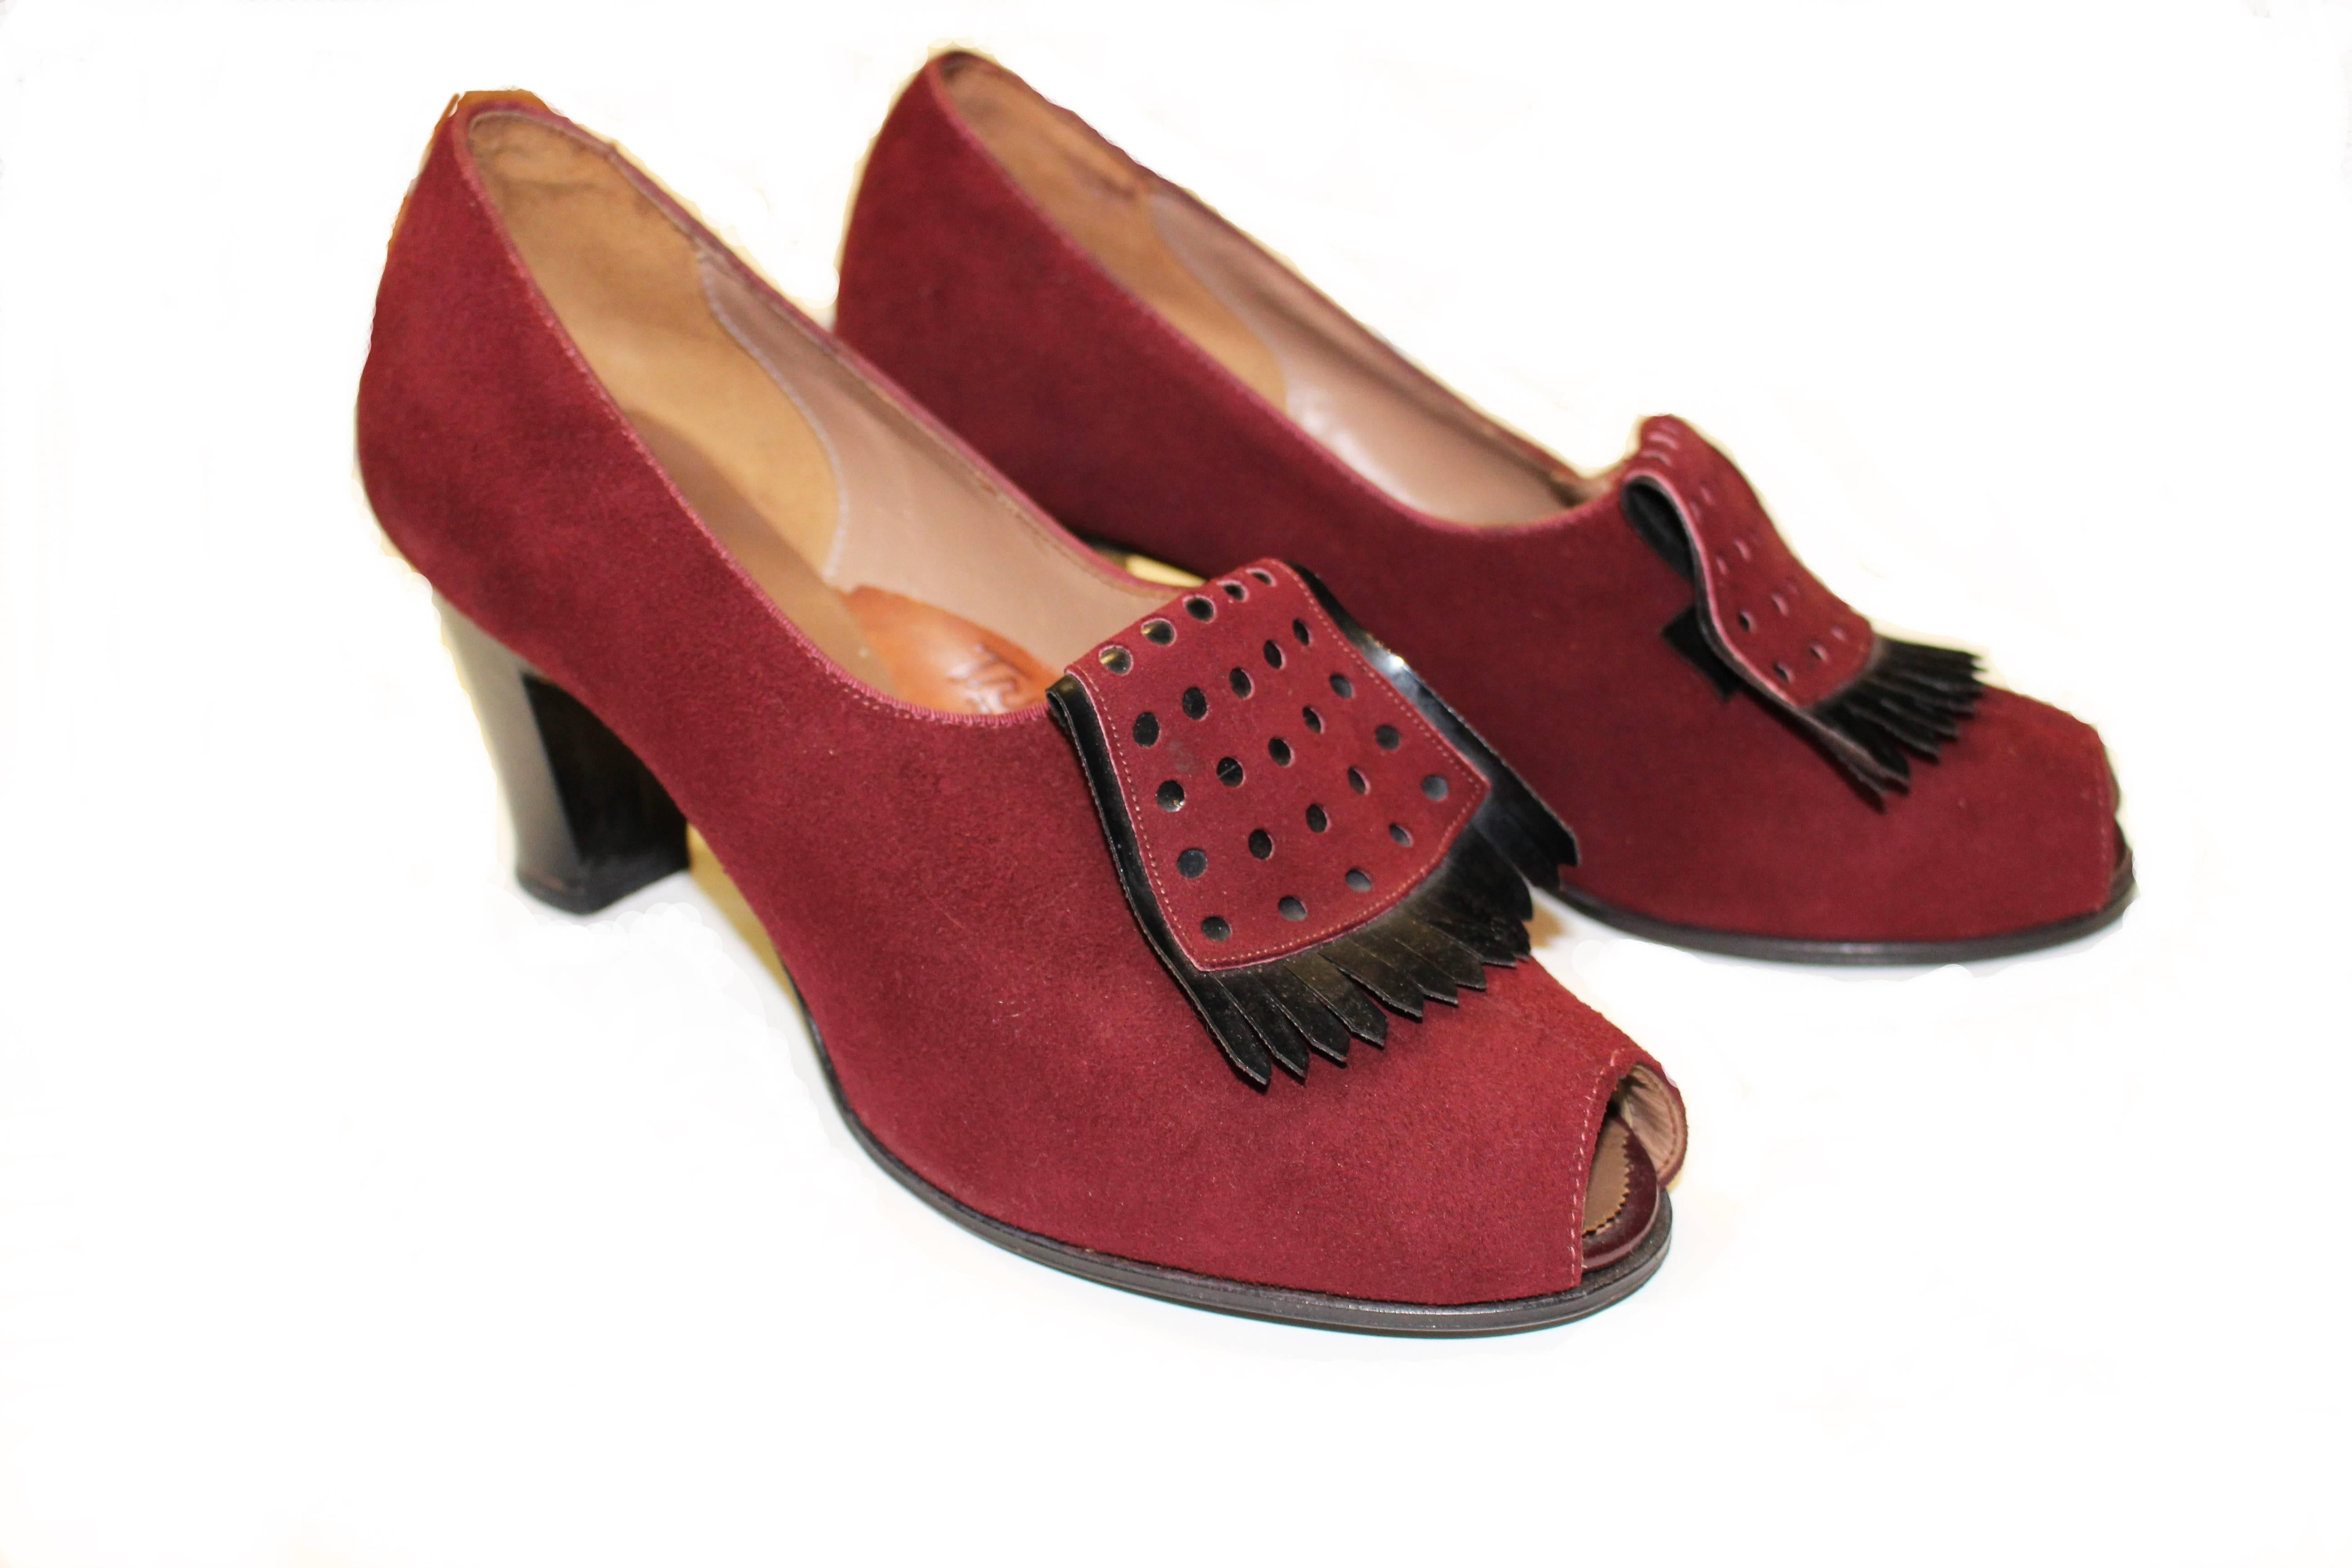 1930's suede burgundy peep toe heel.  Black patent leather kiltie tassels with burgundy suede cut-out overlayer. Size 6b. Made by Treadeasy Deluxe. Never worn. 

Measurements:
Heel to toe: 9